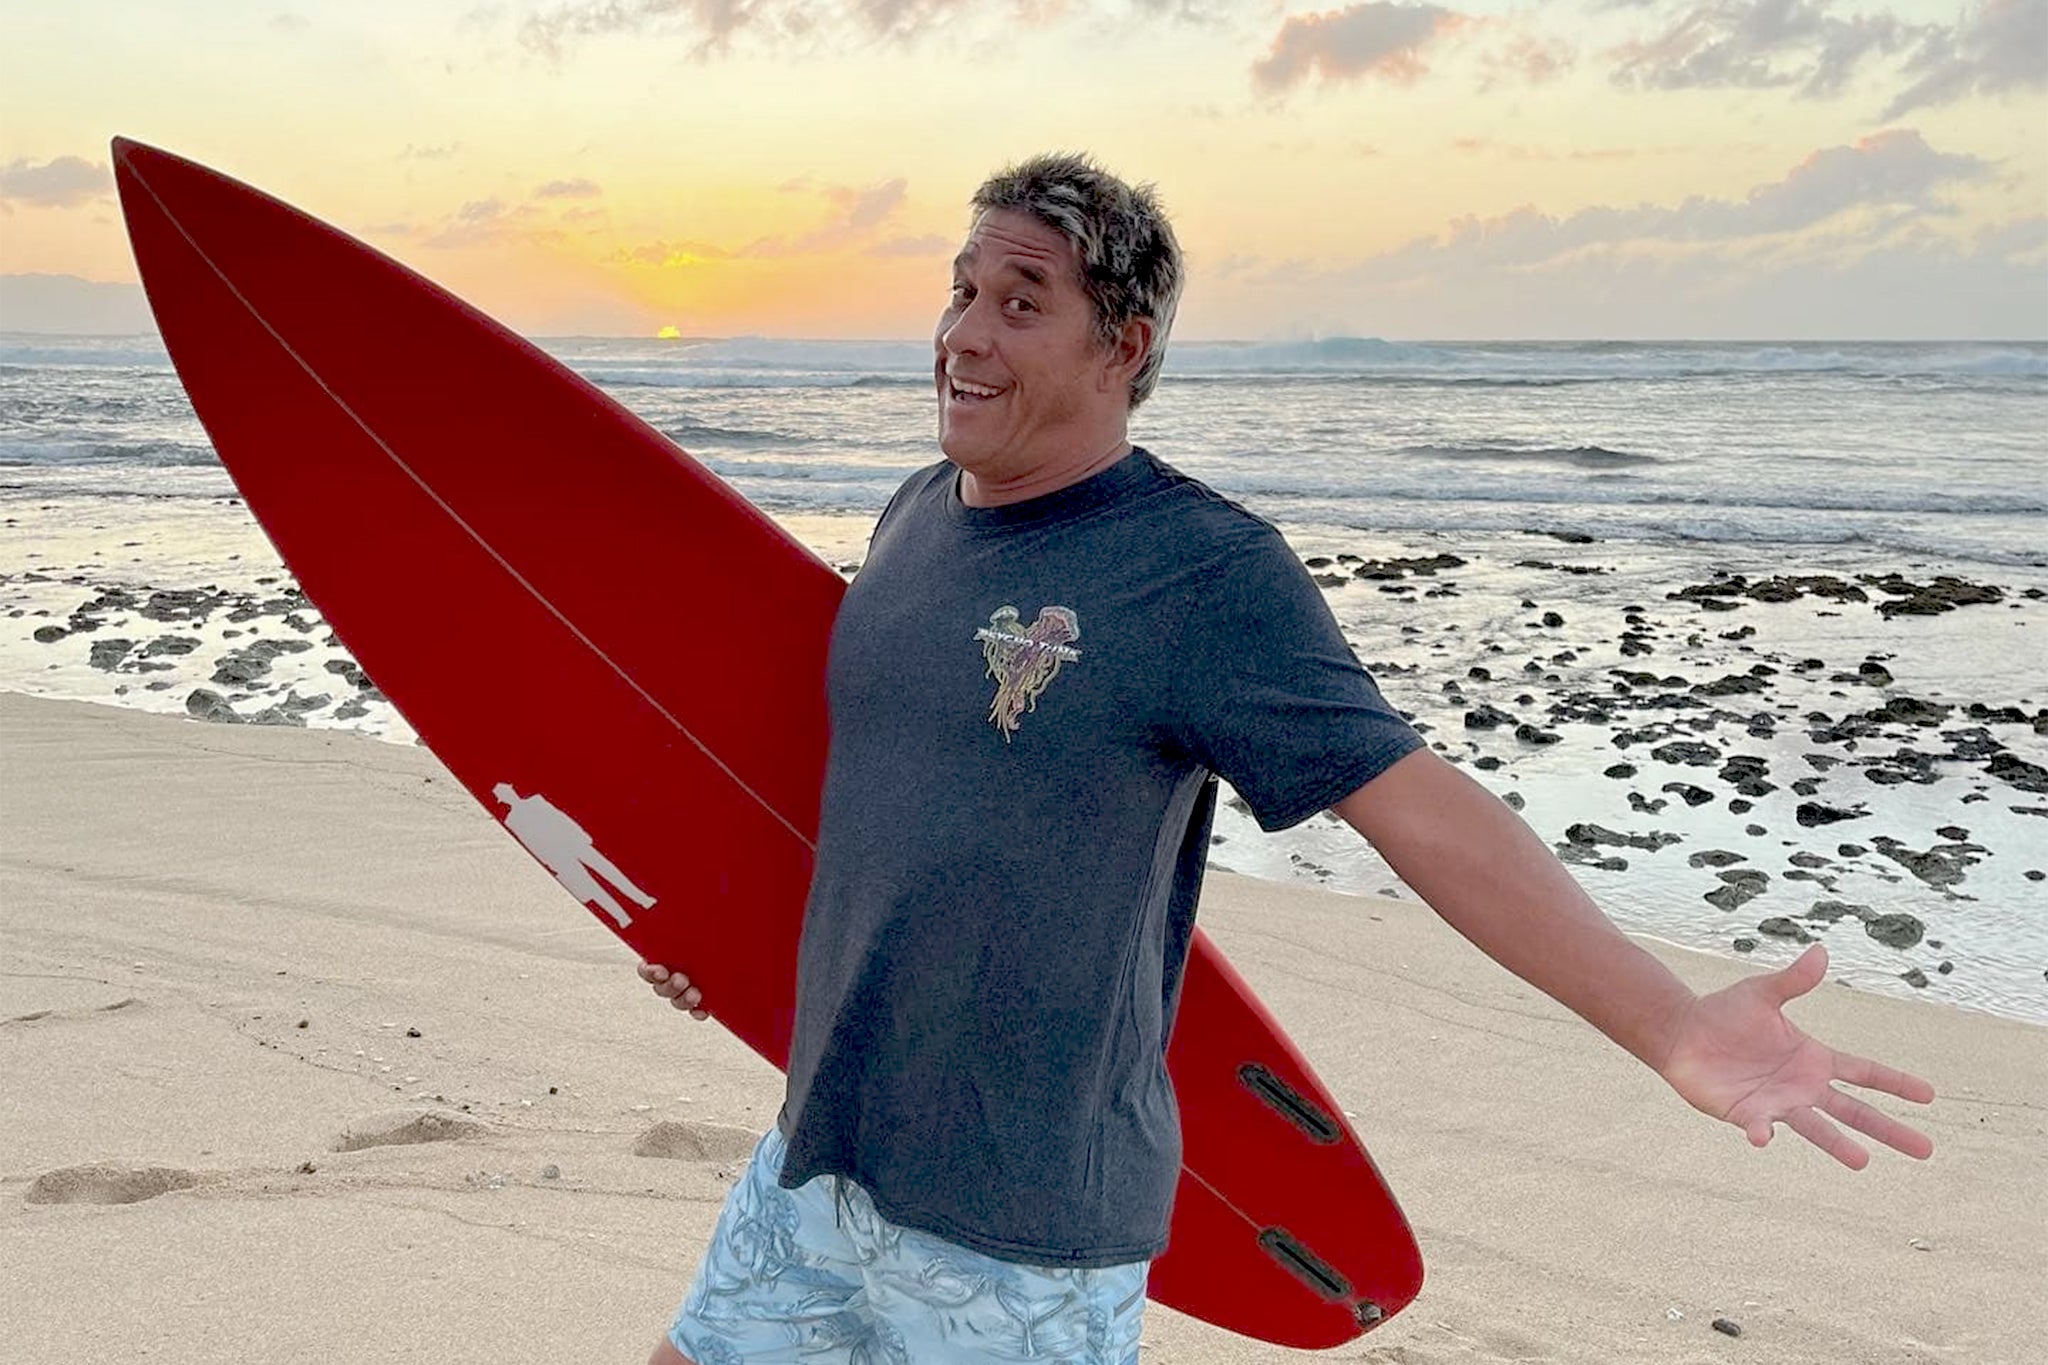 Tamayo Perry death: Surfing legend and Pirates of the Caribbean star dies in shark attack, aged 49 | The Independent